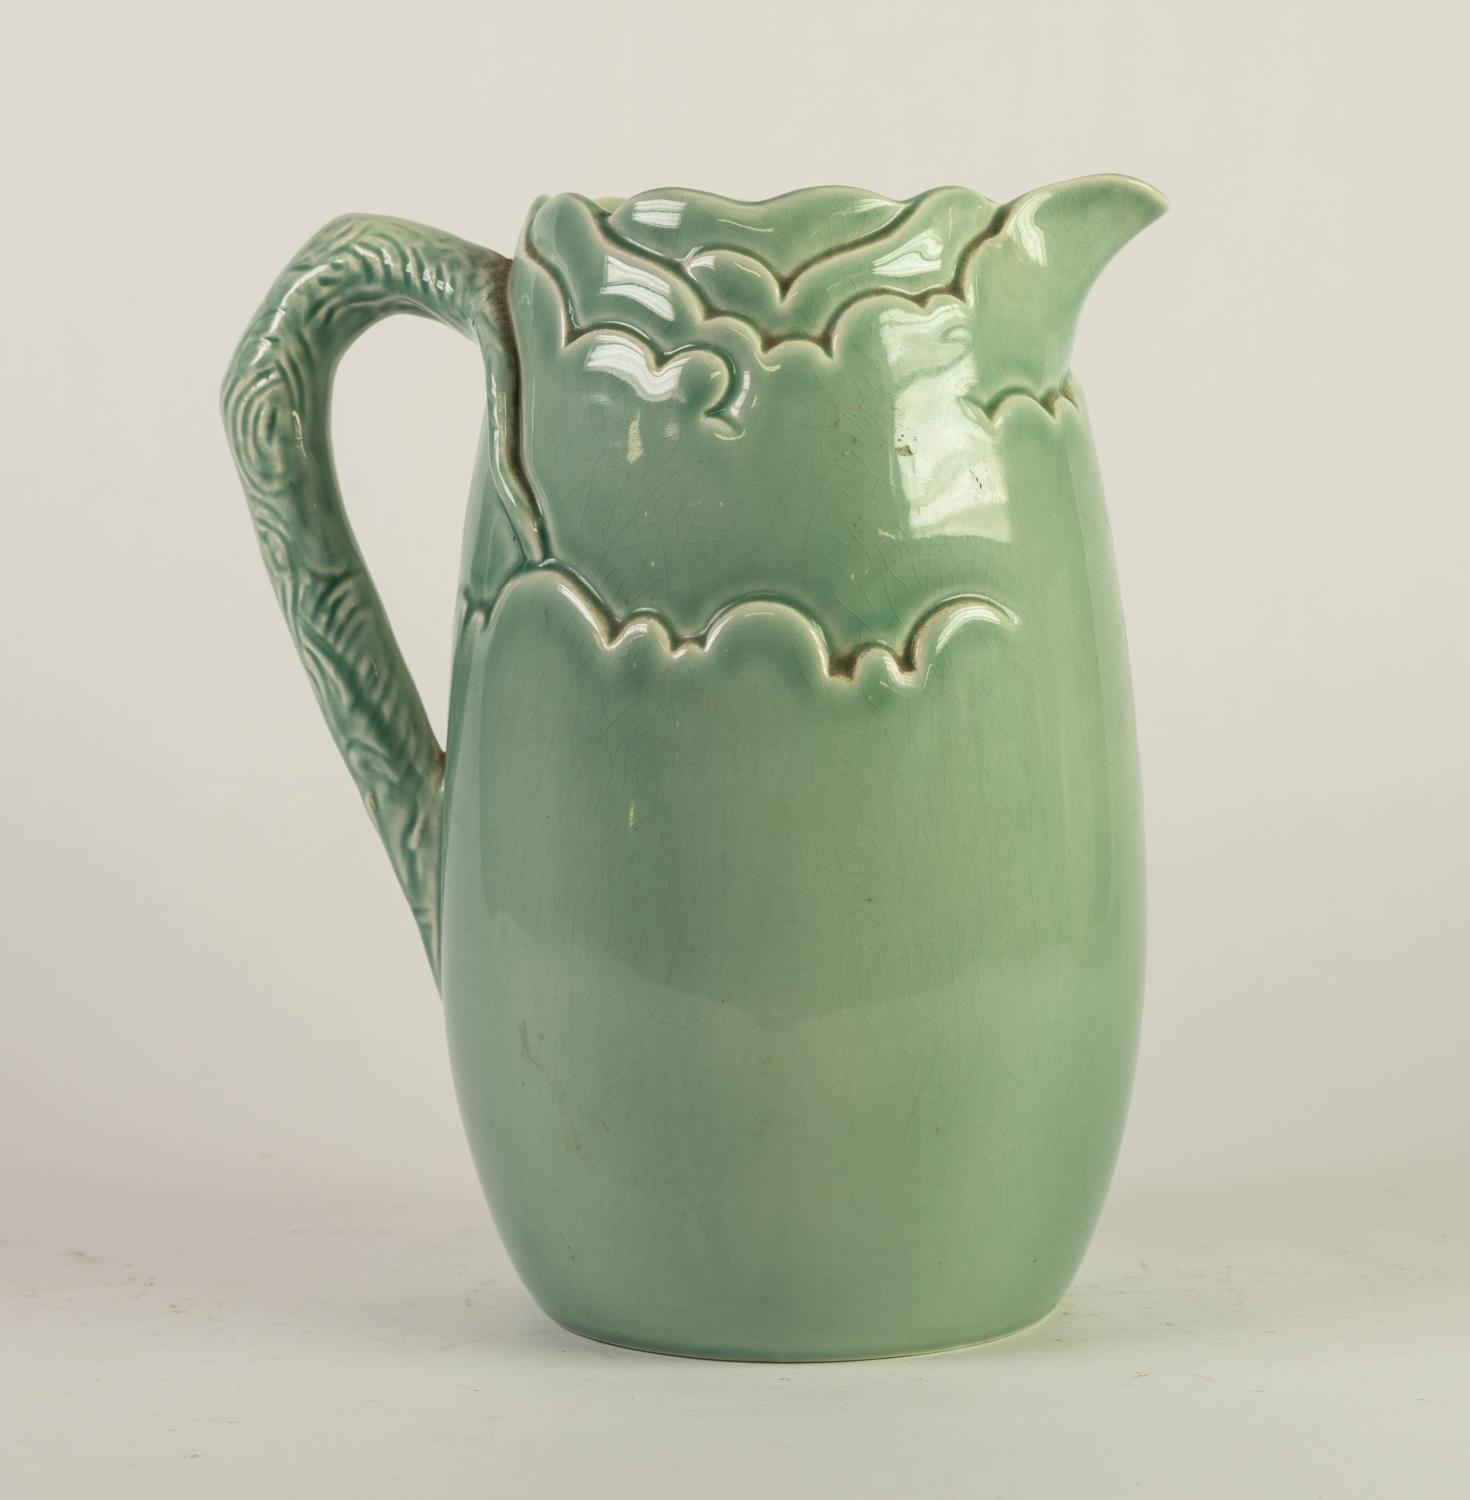 CLARICE CLIFF FOR NEWPORT POTTERY ?BEANSTALK? JUG, of ovoid form with rustic handle, glazed in - Image 2 of 3